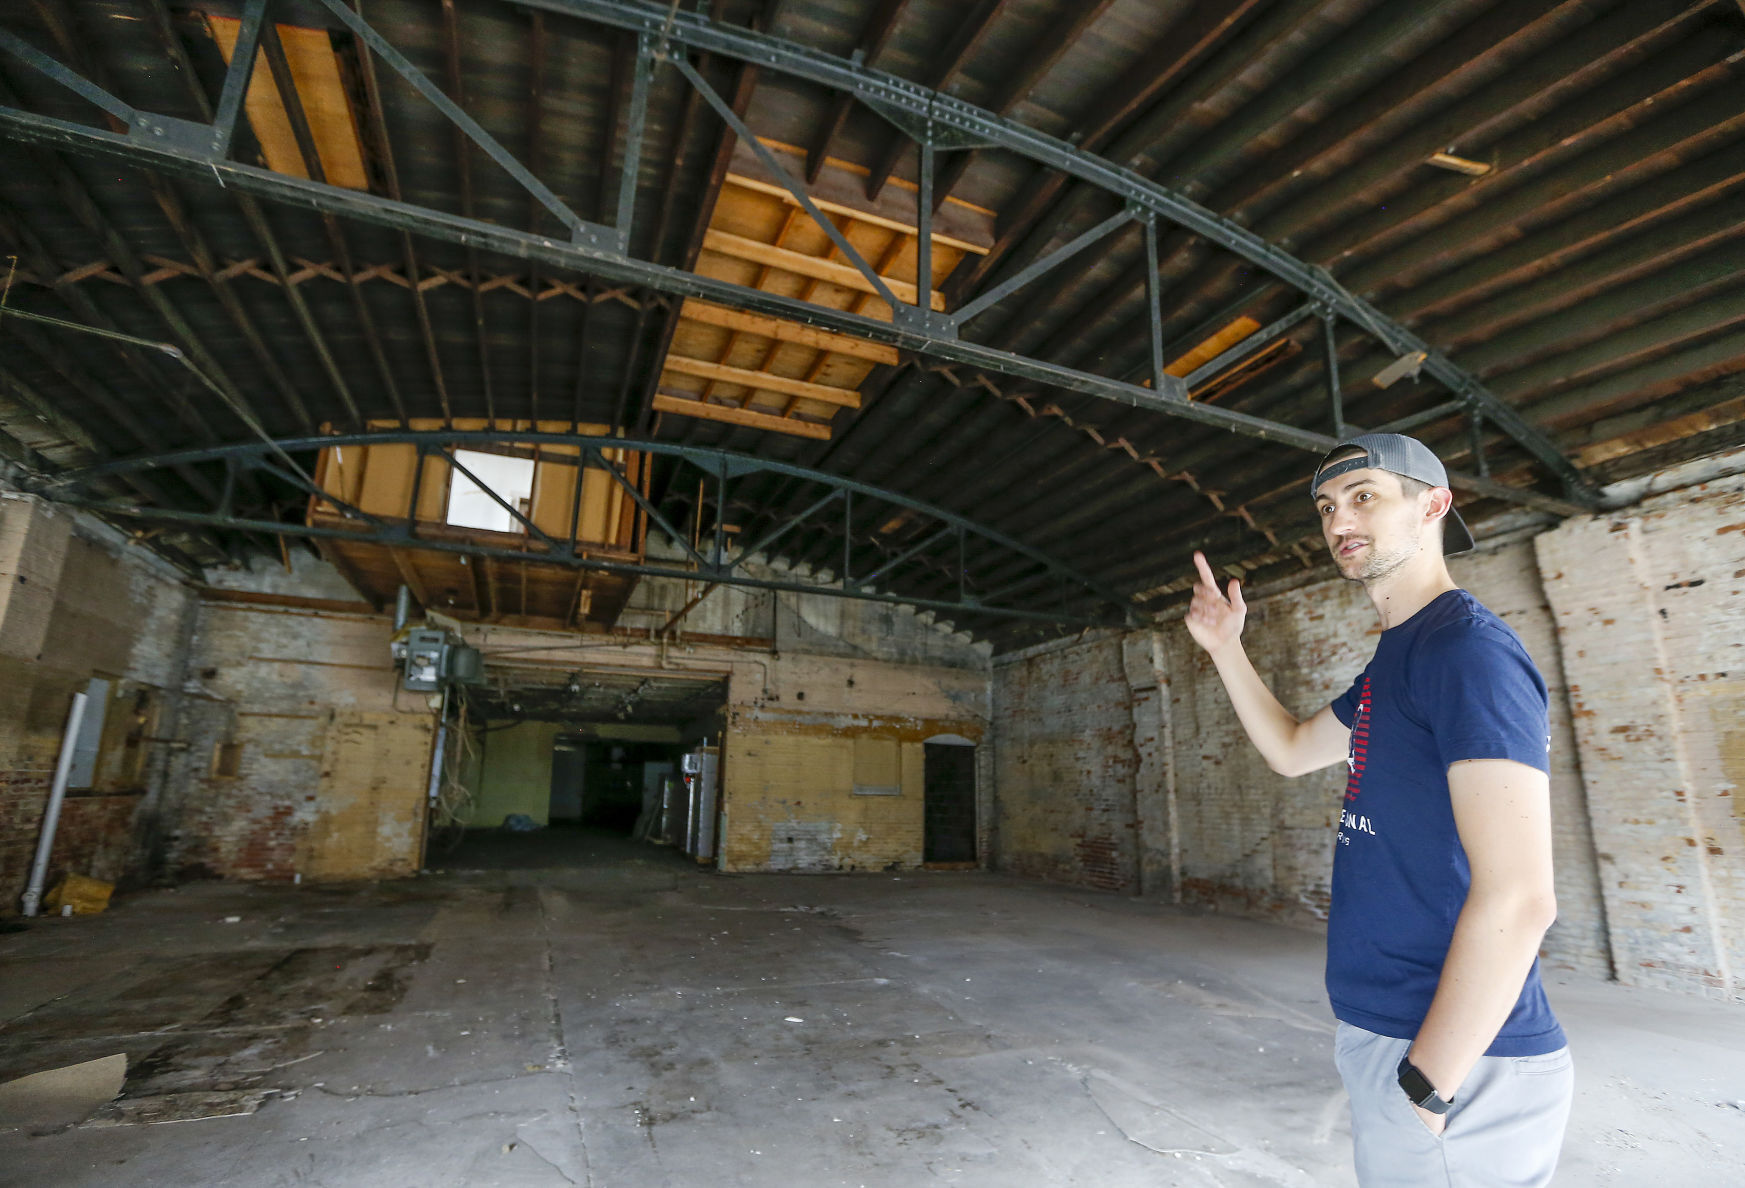 Bart Frederick, taproom manager for Dimensional Brewing Co. in Dubuque, shows the adjacent building at 99 Main St. that the brewery recently acquired. The space formerly housed Fido Fit and will be converted into additional taproom space and event center. PHOTO CREDIT: Dave Kettering